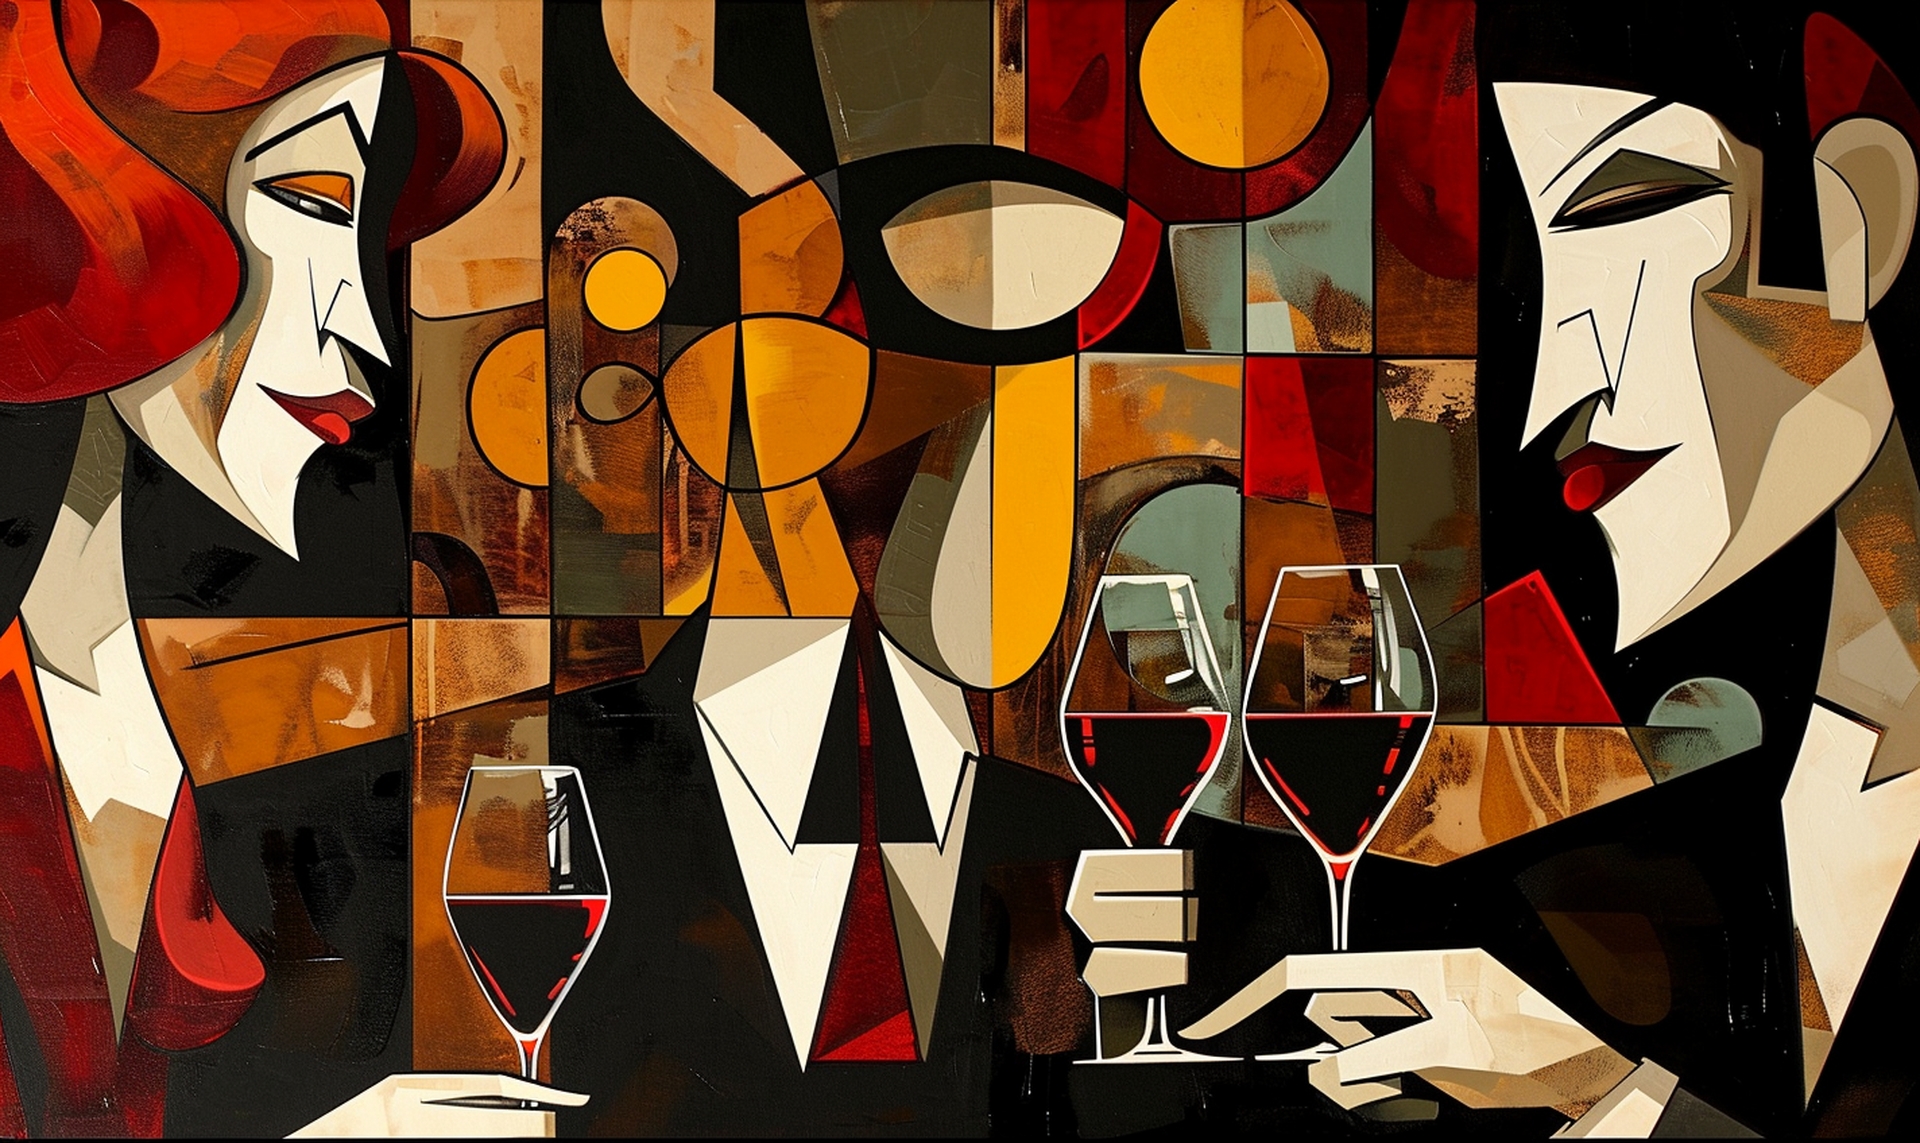 The image depicts friends toasting with wine, capturing the joy and sophistication of wine enjoyment, set in an exotic, stylish environment, reflecting the noir art of Frank Miller and the dynamic style of Pablo Picasso. - how to impress with wine